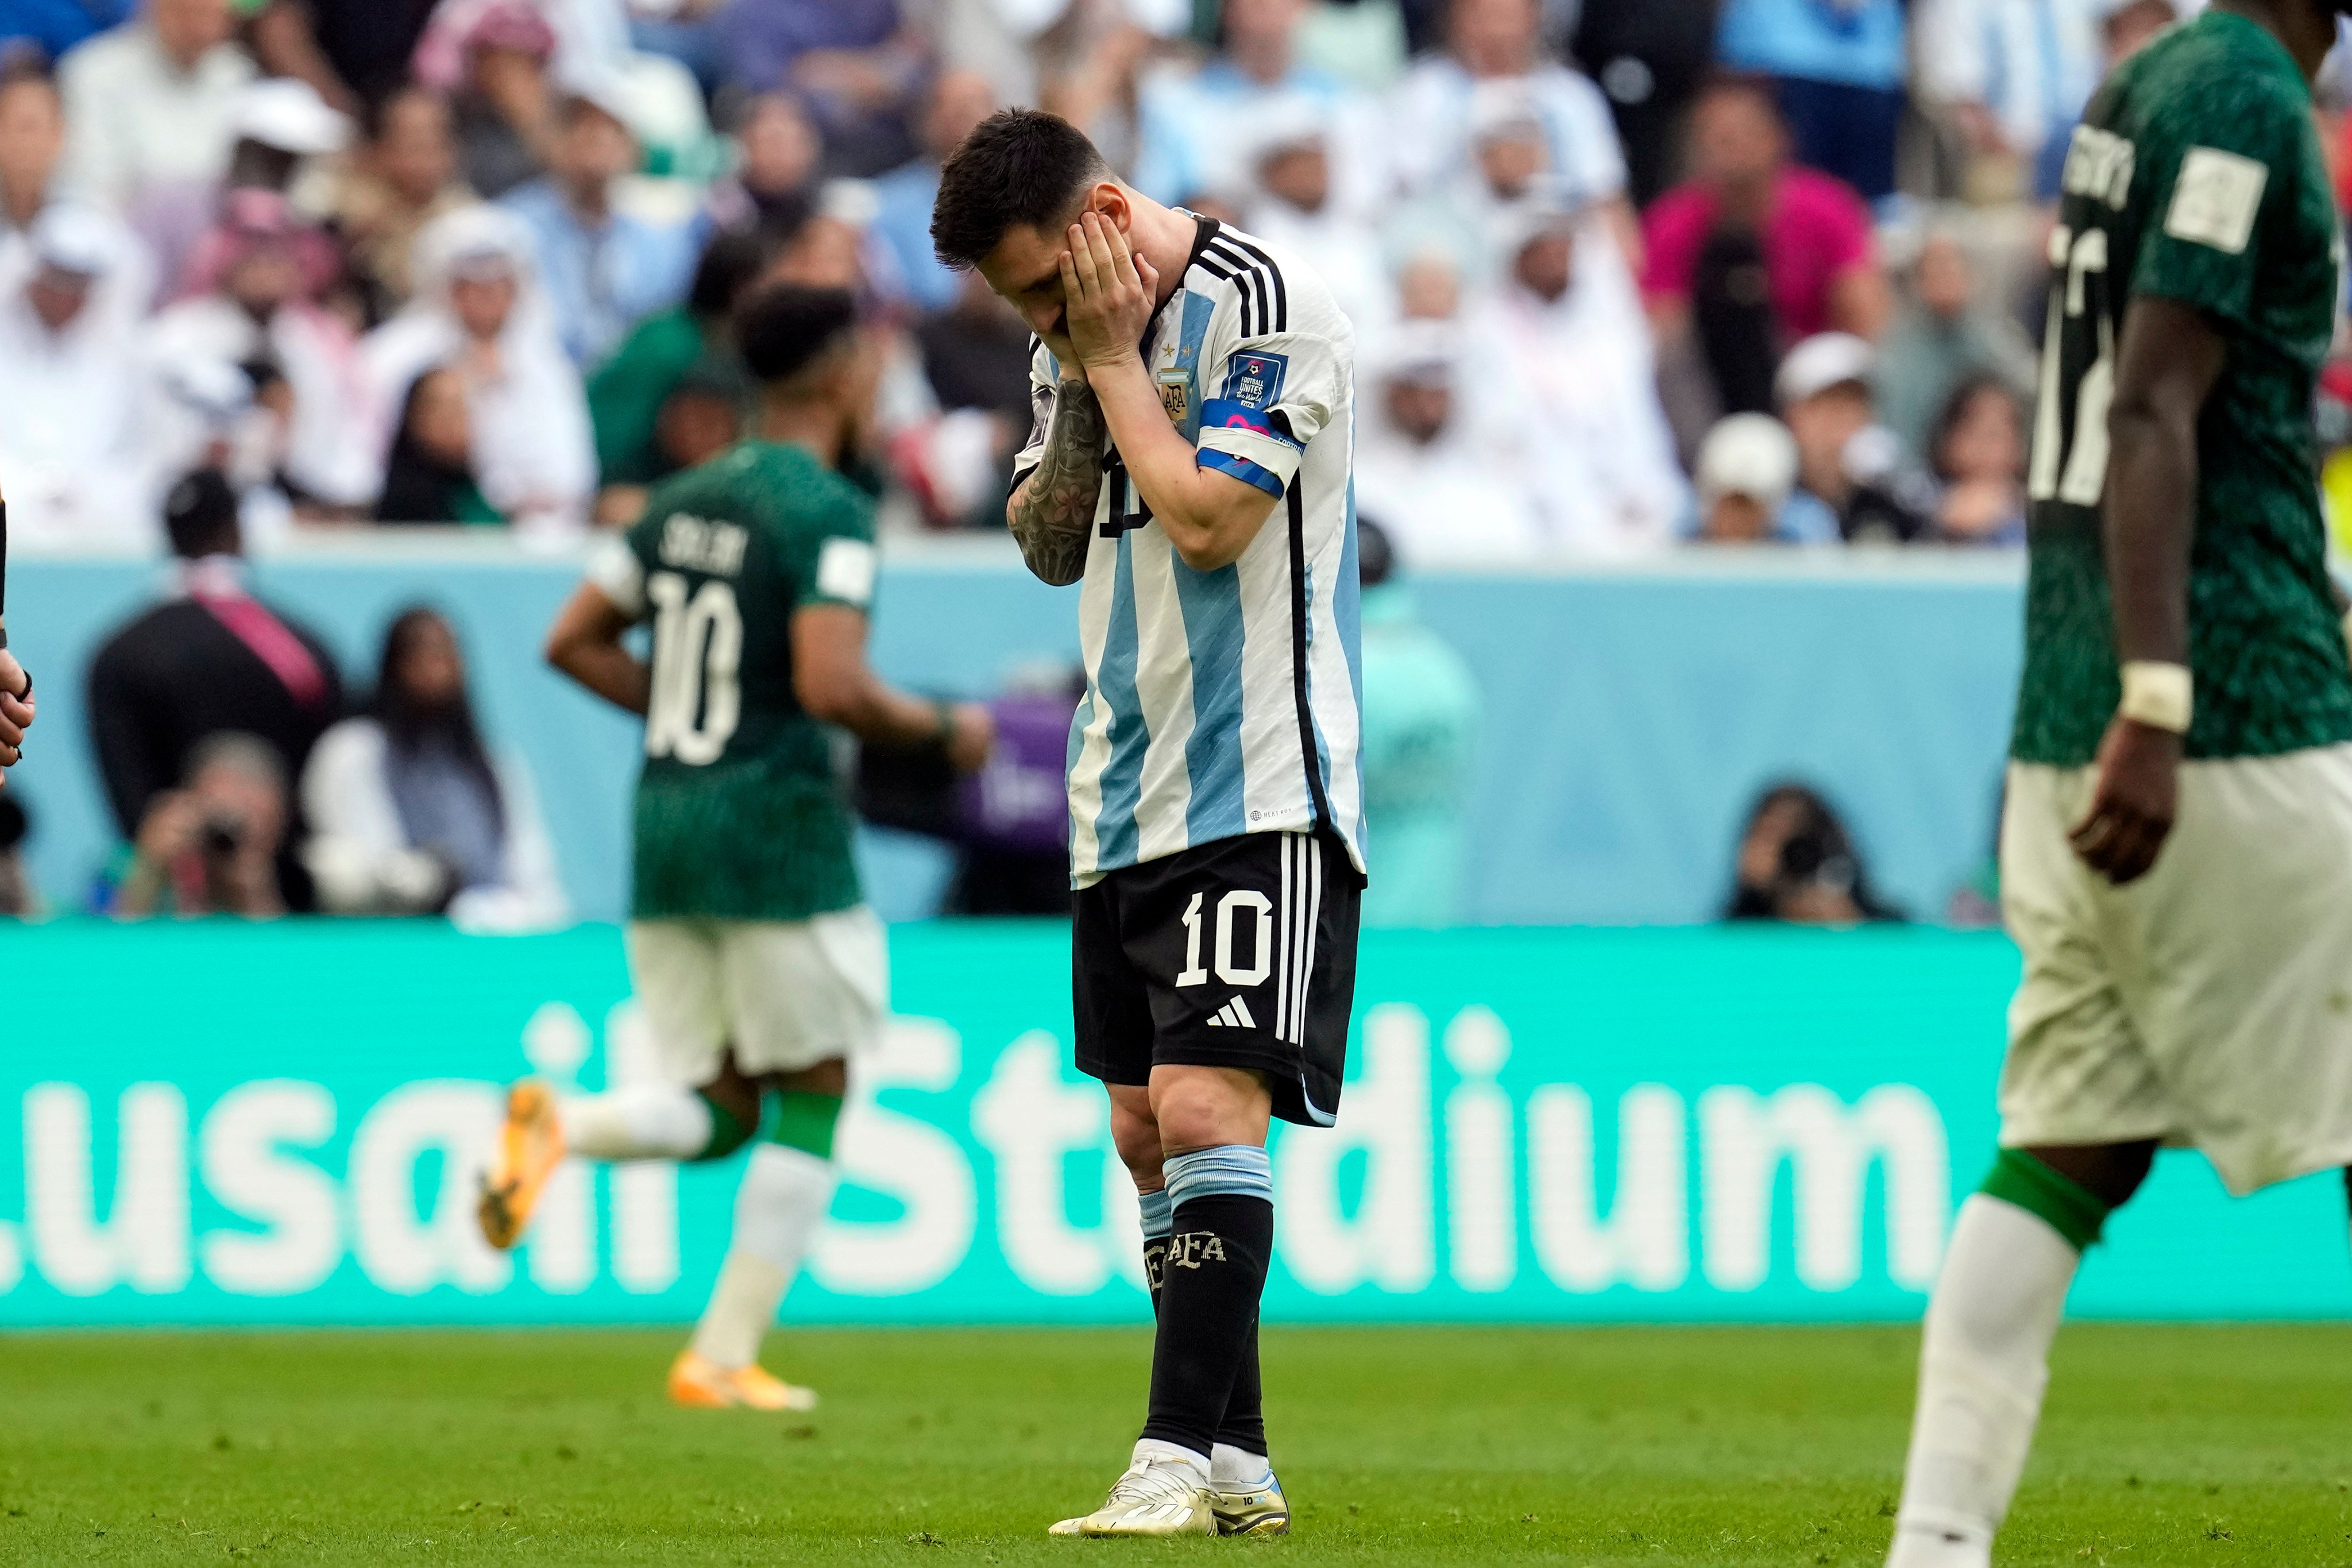 Today another World Cup starts' - Lionel Messi backs revamped Argentina  side to challenge in Qatar following poor start - Eurosport